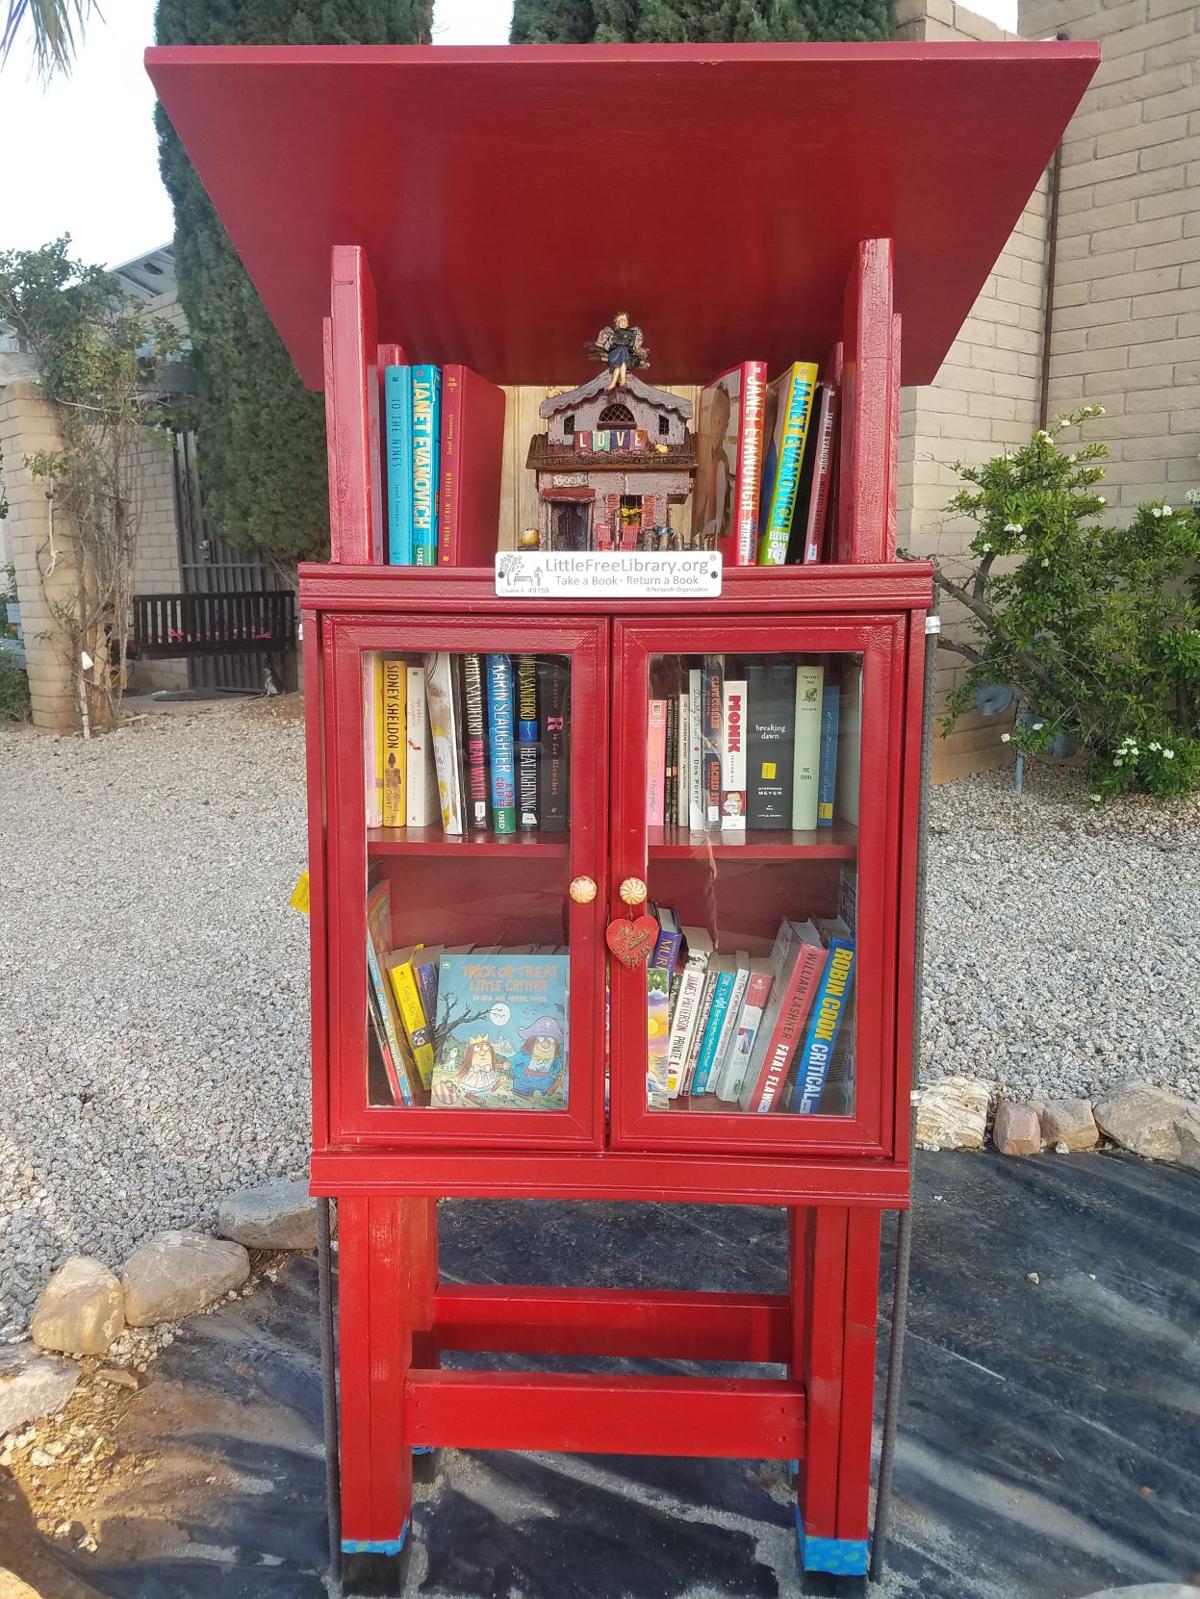 grand-openings-set-for-new-little-free-library-locations-local-news